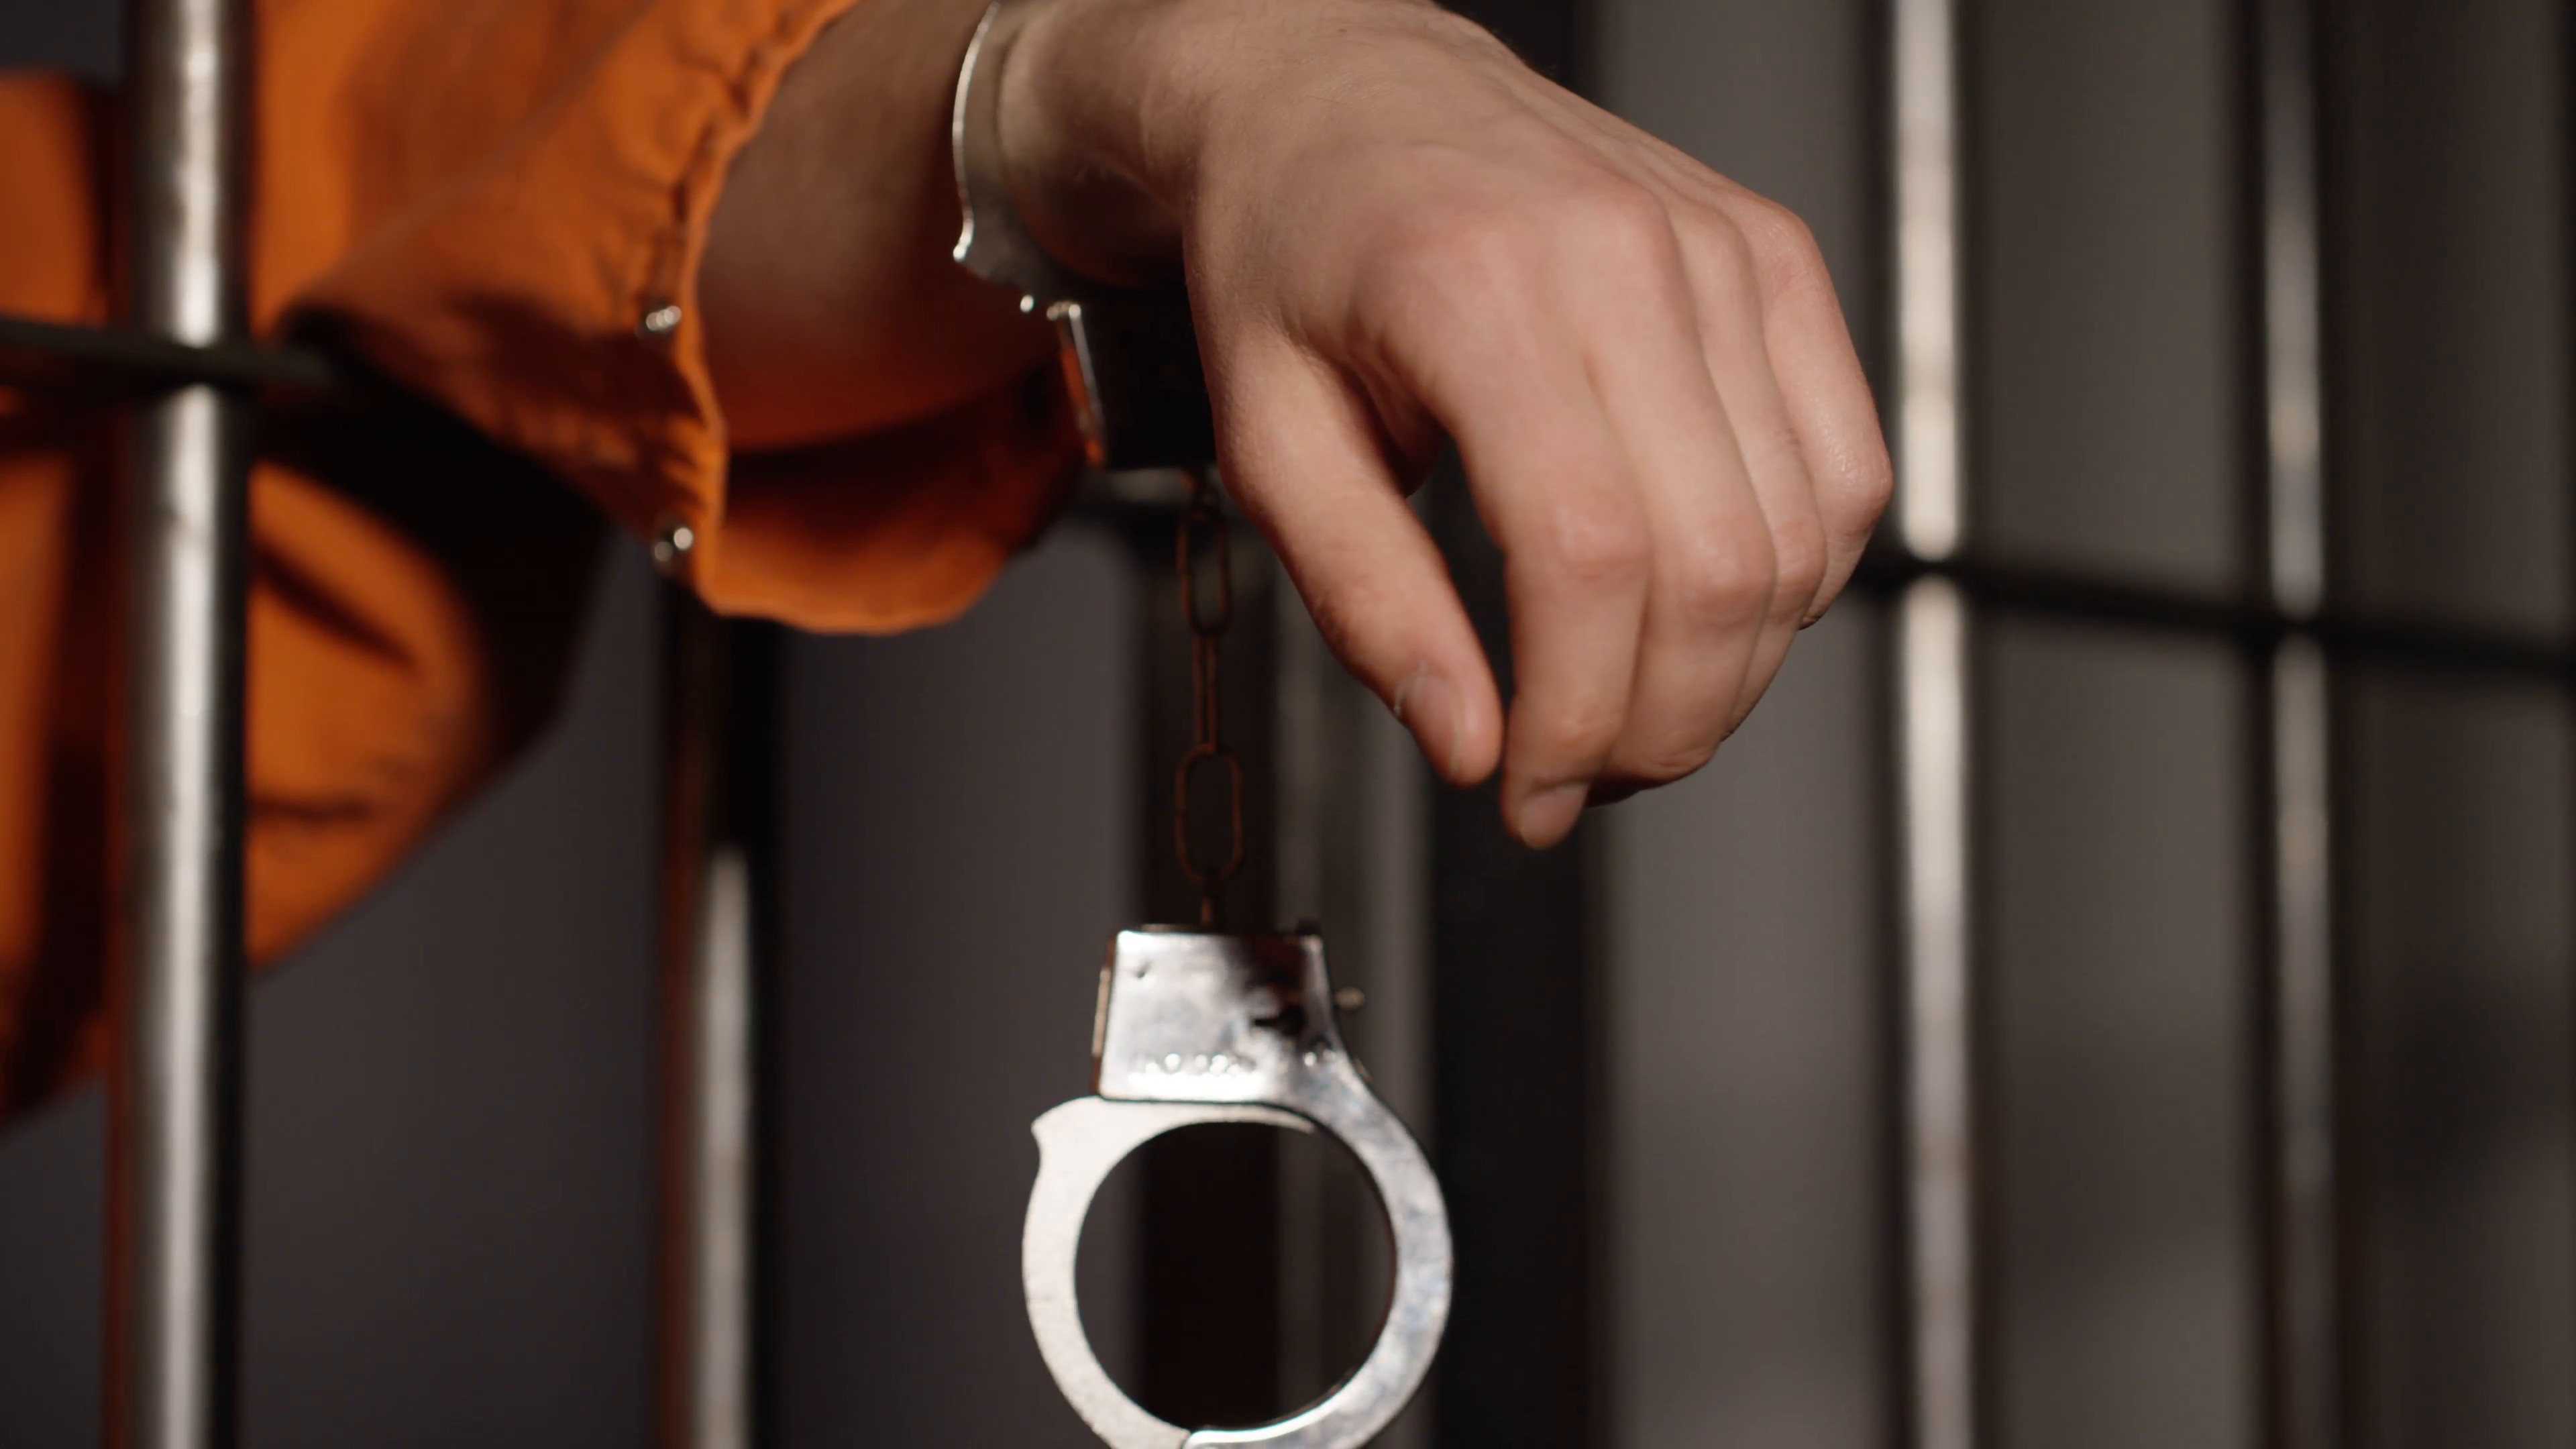 3840x2160 Subscription Library Prison cells in Jail - Handcuff dangling from man's  arm in cell